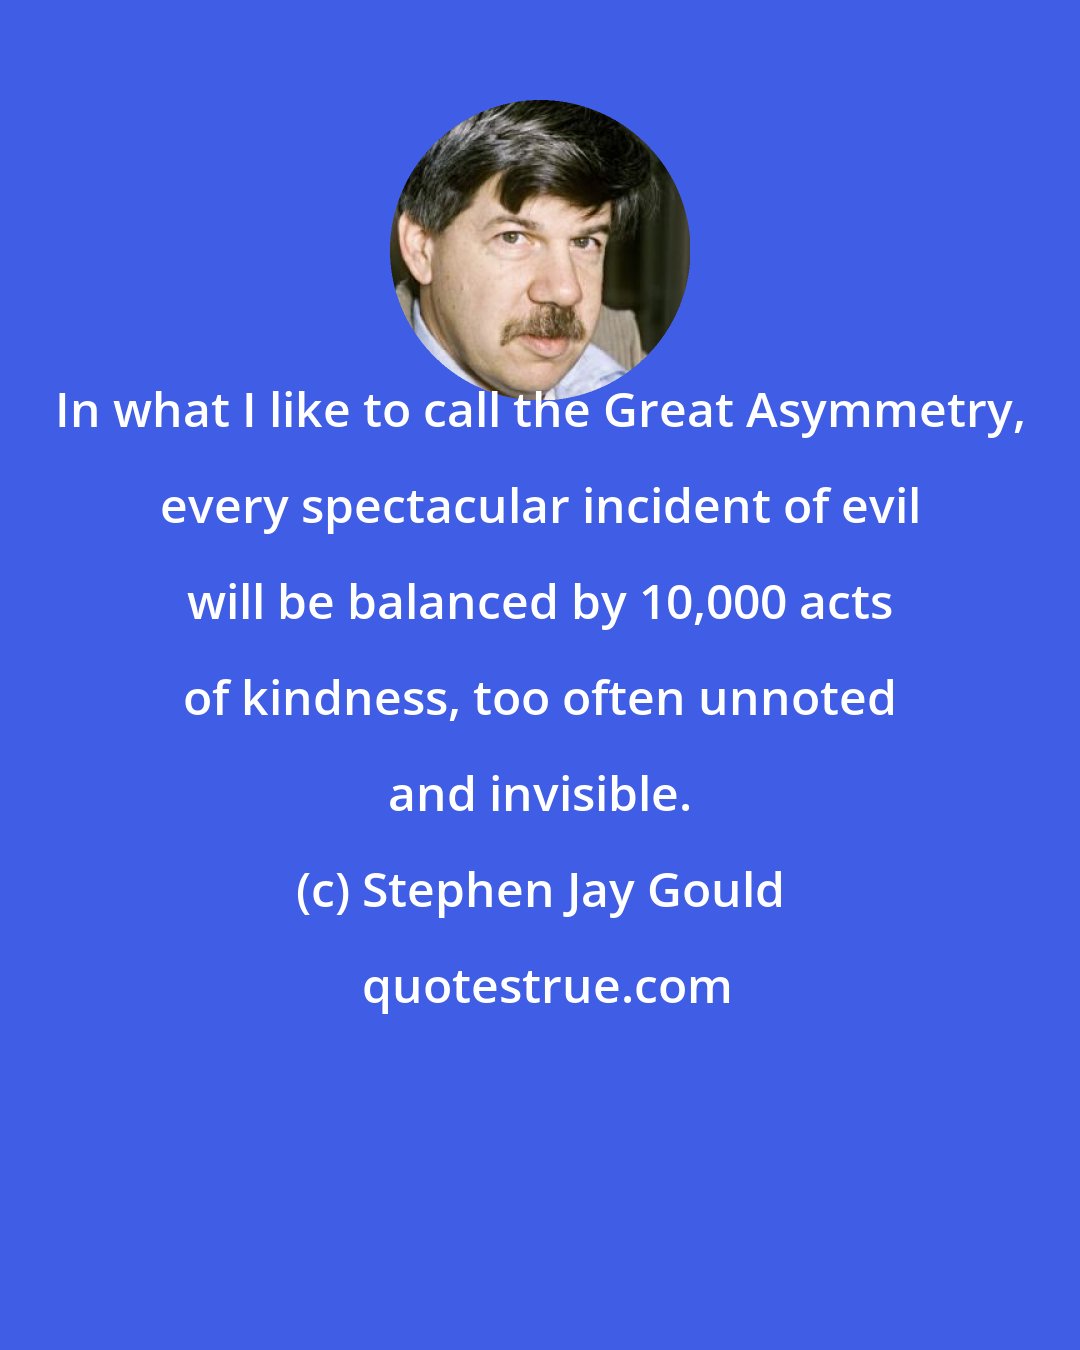 Stephen Jay Gould: In what I like to call the Great Asymmetry, every spectacular incident of evil will be balanced by 10,000 acts of kindness, too often unnoted and invisible.